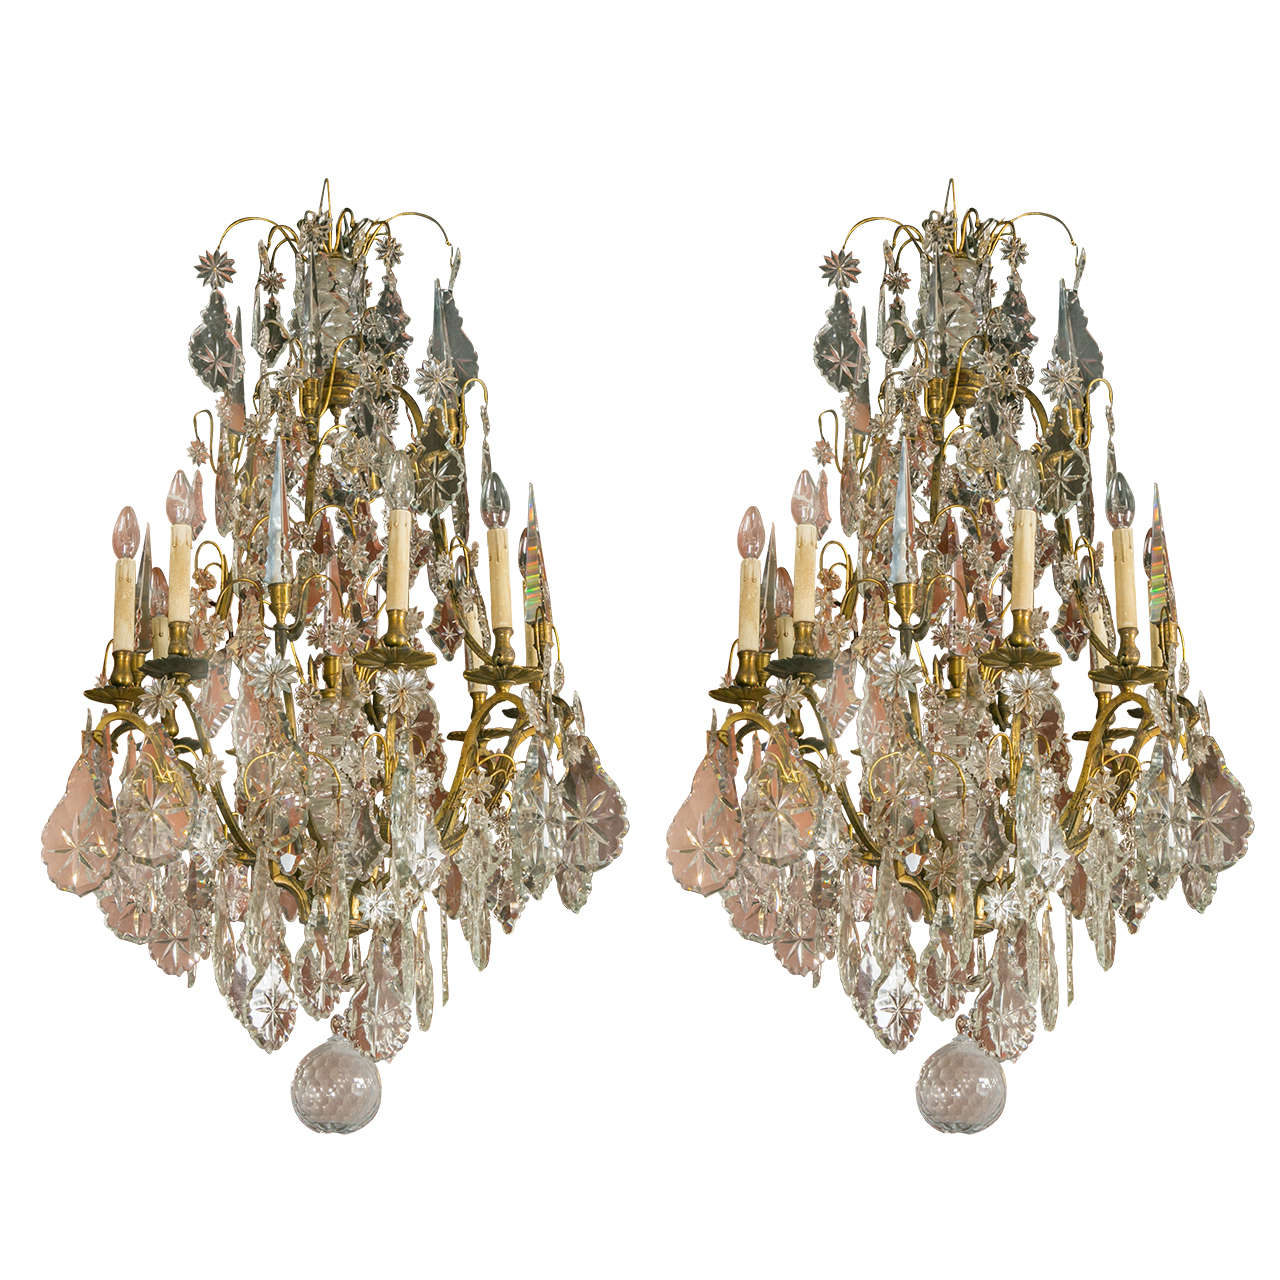 Pair of French Chandeliers 19th Century Louis XV Style